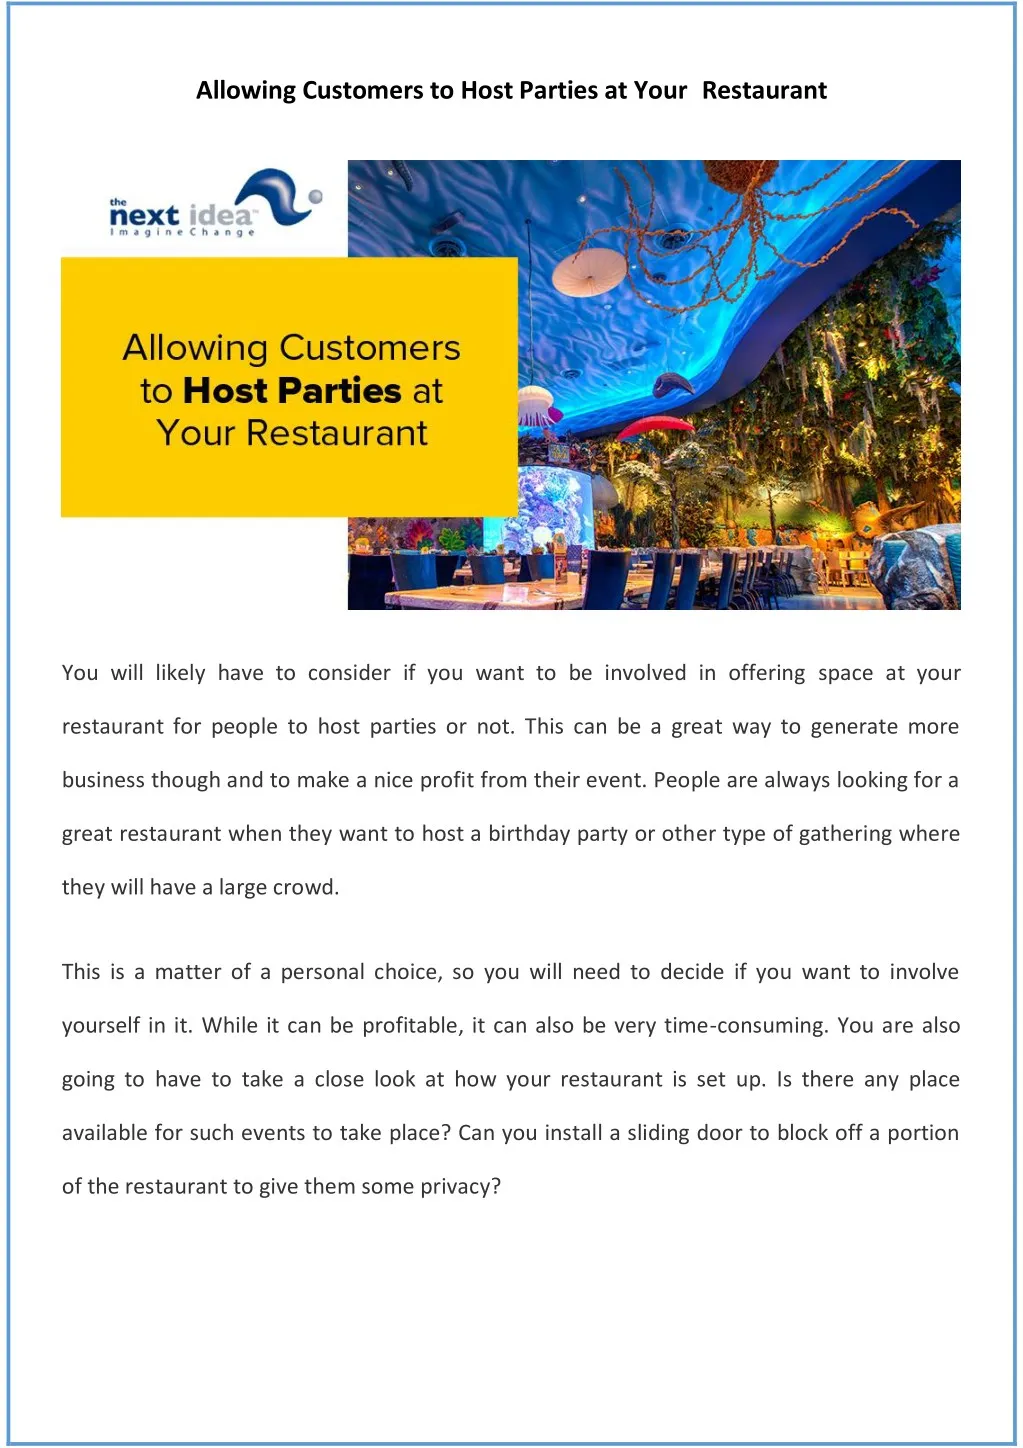 allowing customers to host parties at your